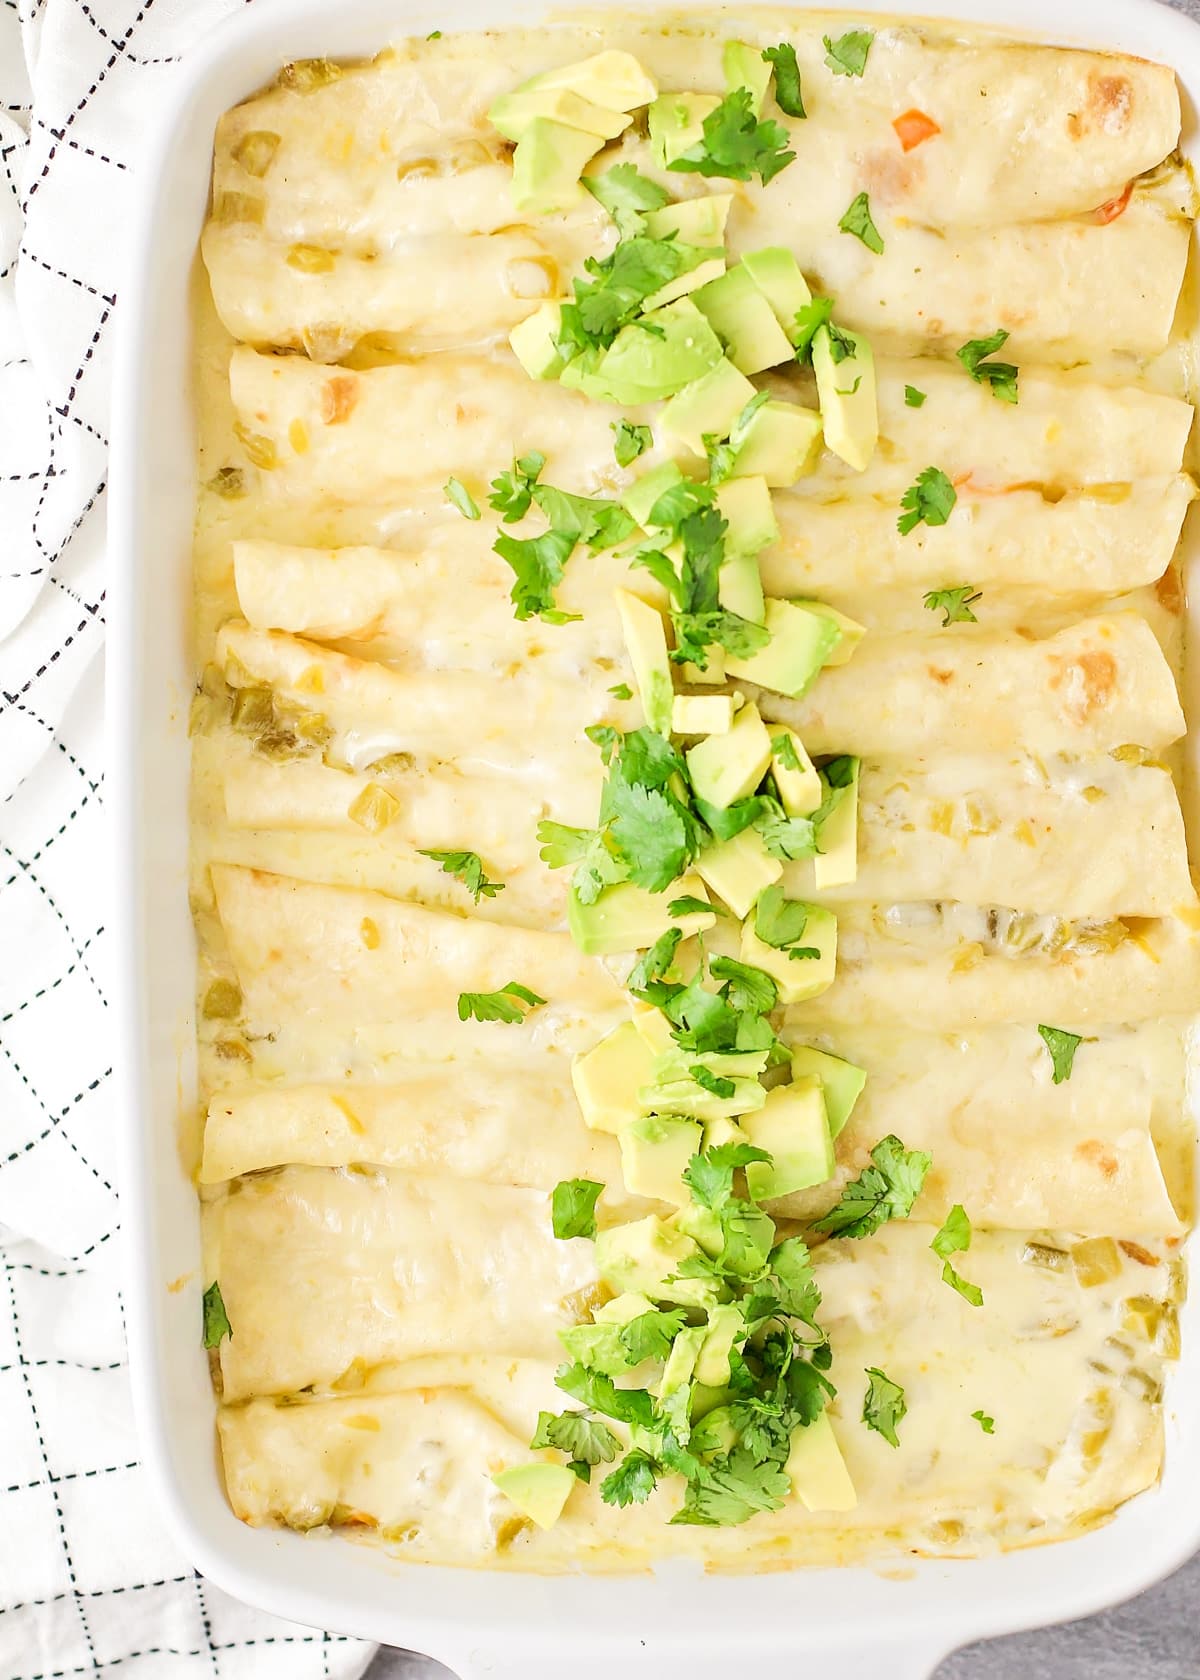 A close up of a baking dish filled with white chicken enchiladas topped with avocado and cilantro.